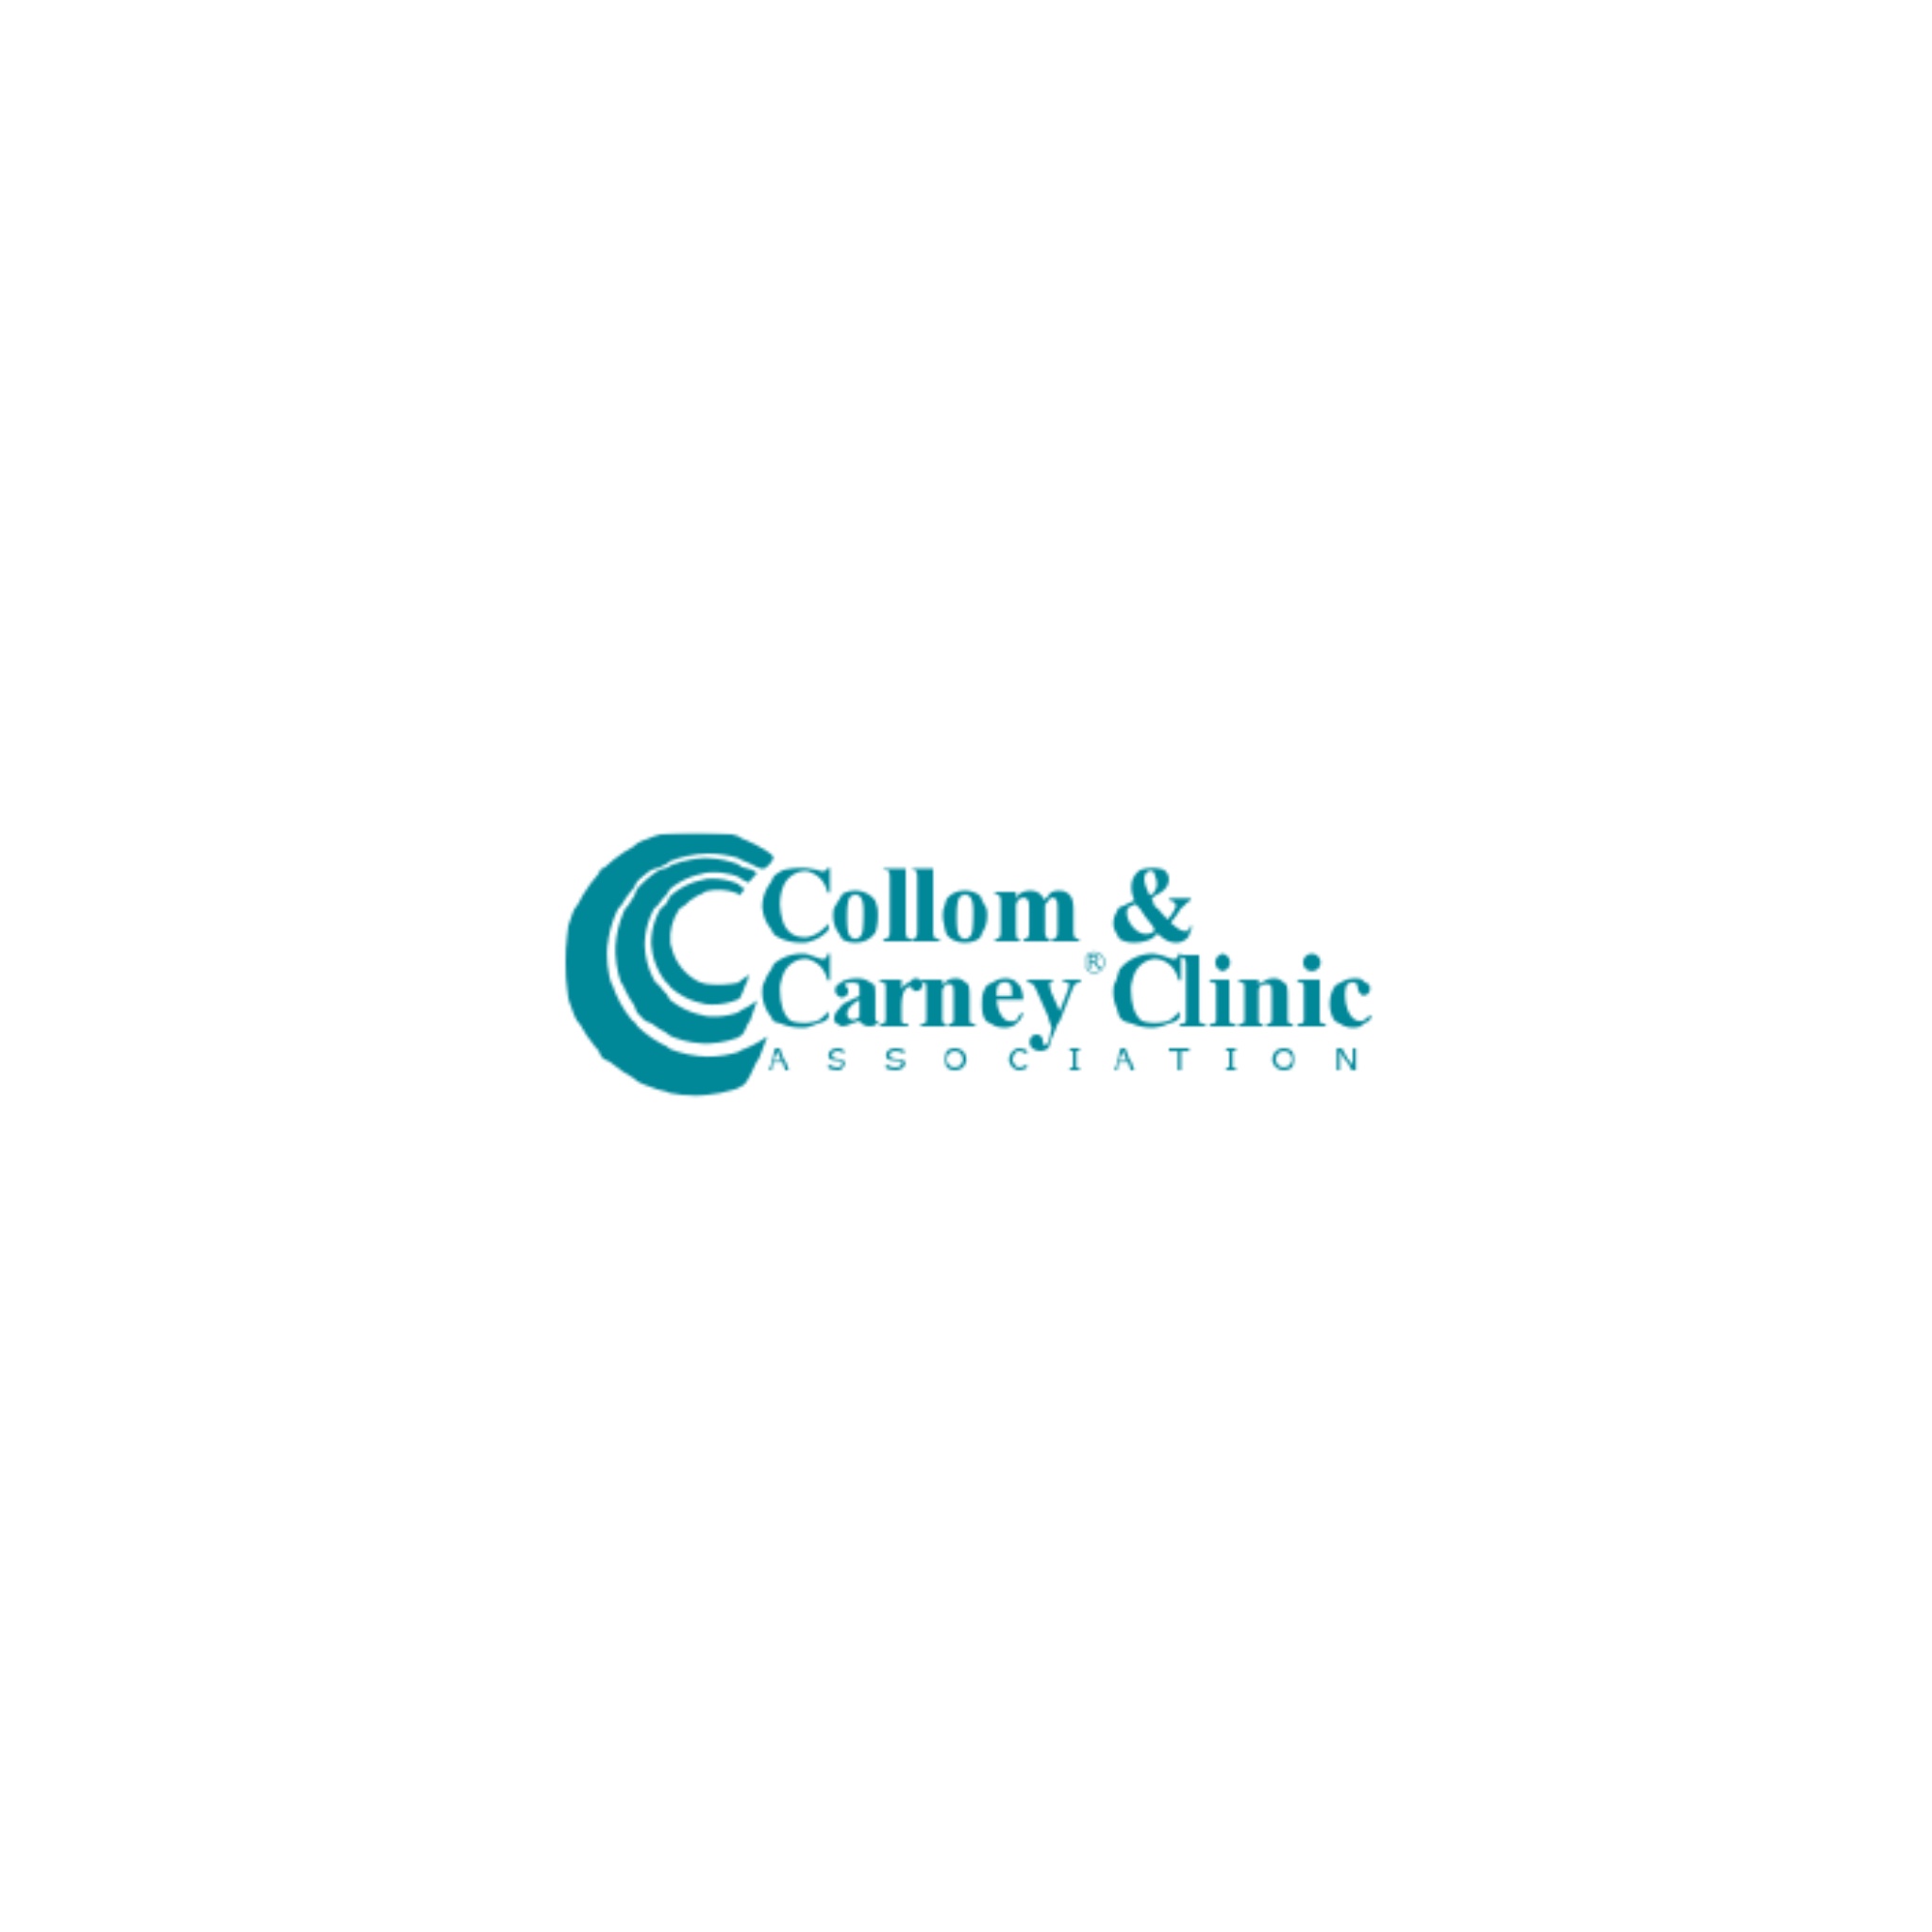 Cullom and Carney Clinic